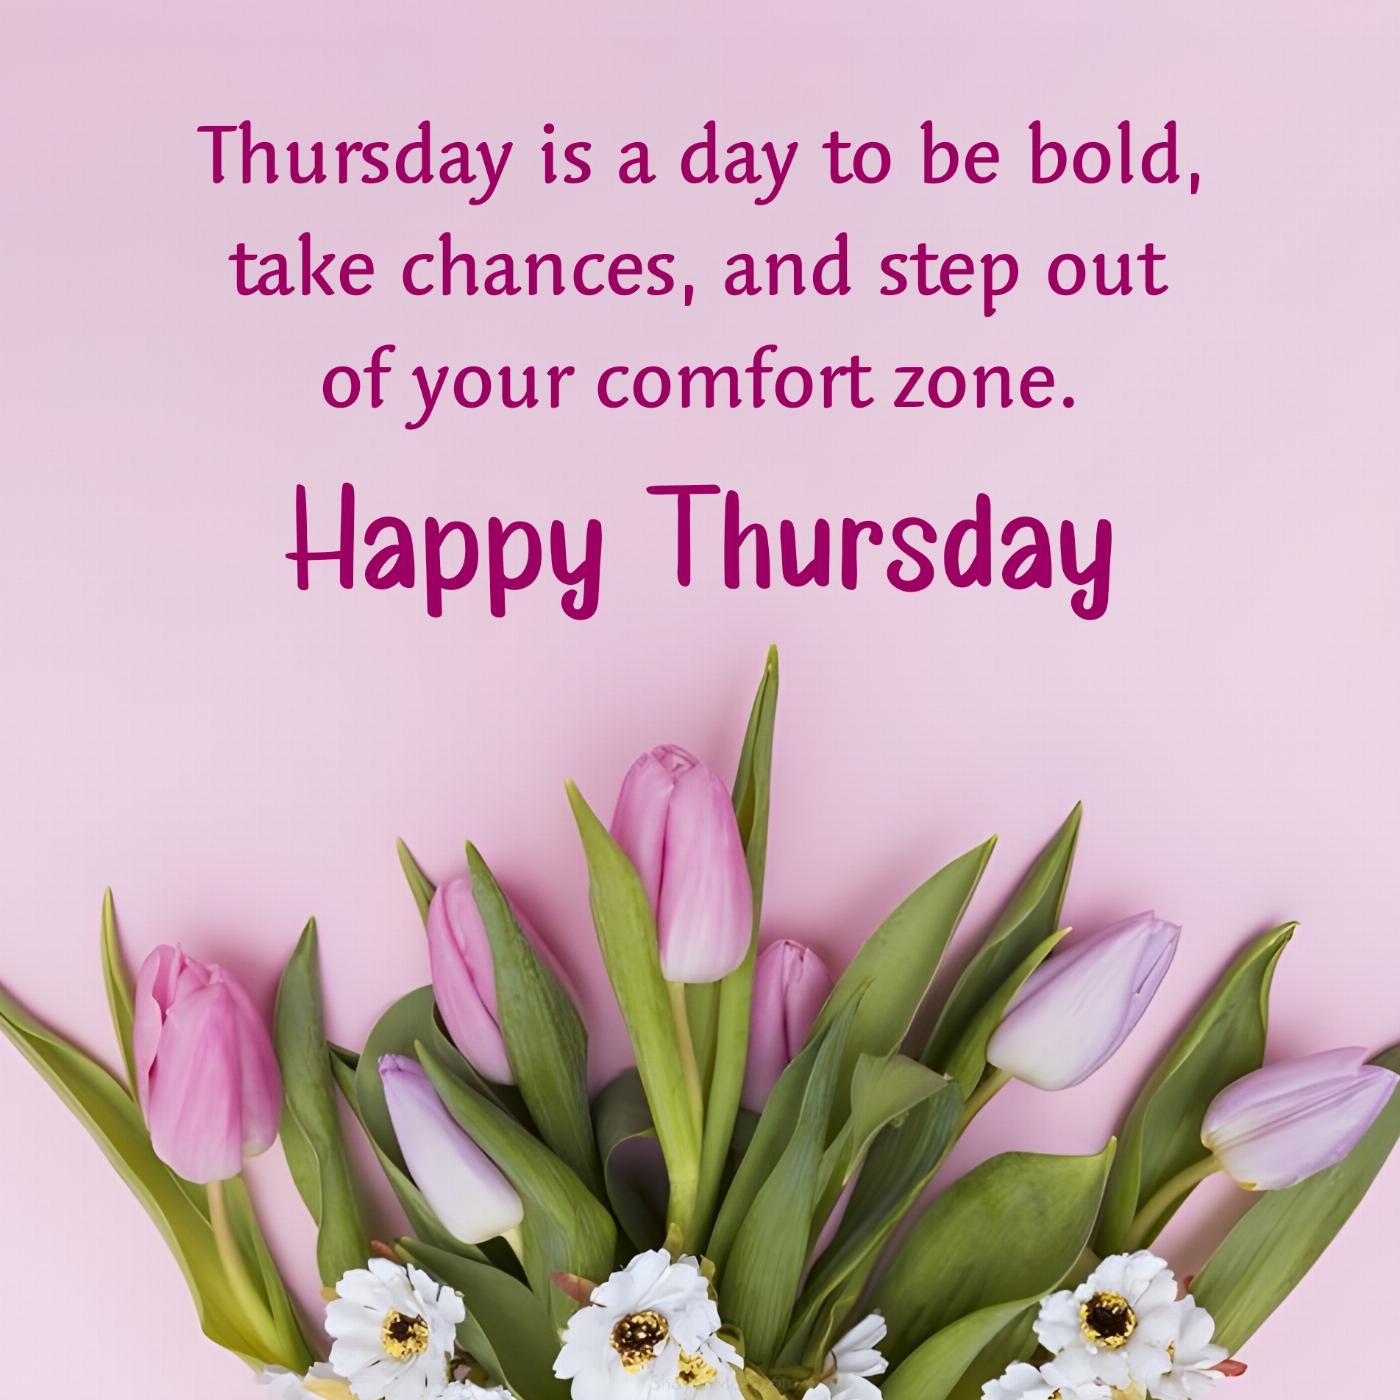 Thursday is a day to be bold take chances and step out